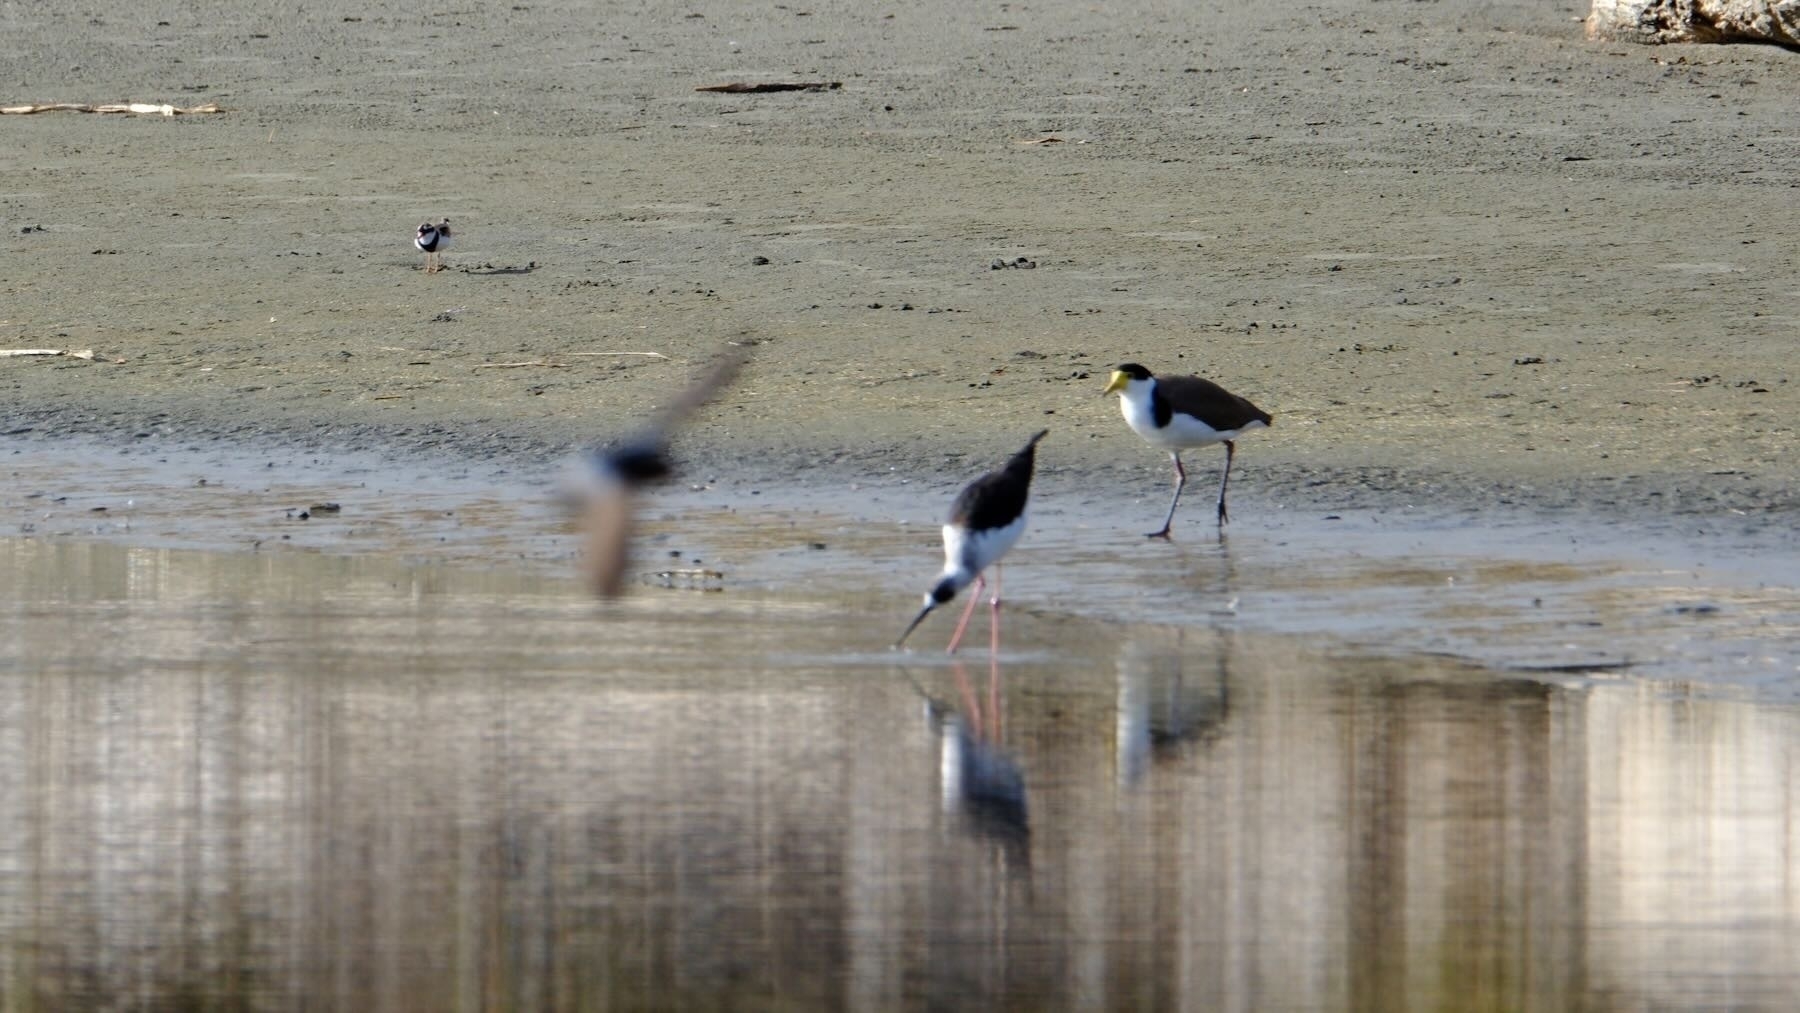 A spur-winged plover, a pied stilt a black-fronted dotterel (in the background), while a swallow flies by.